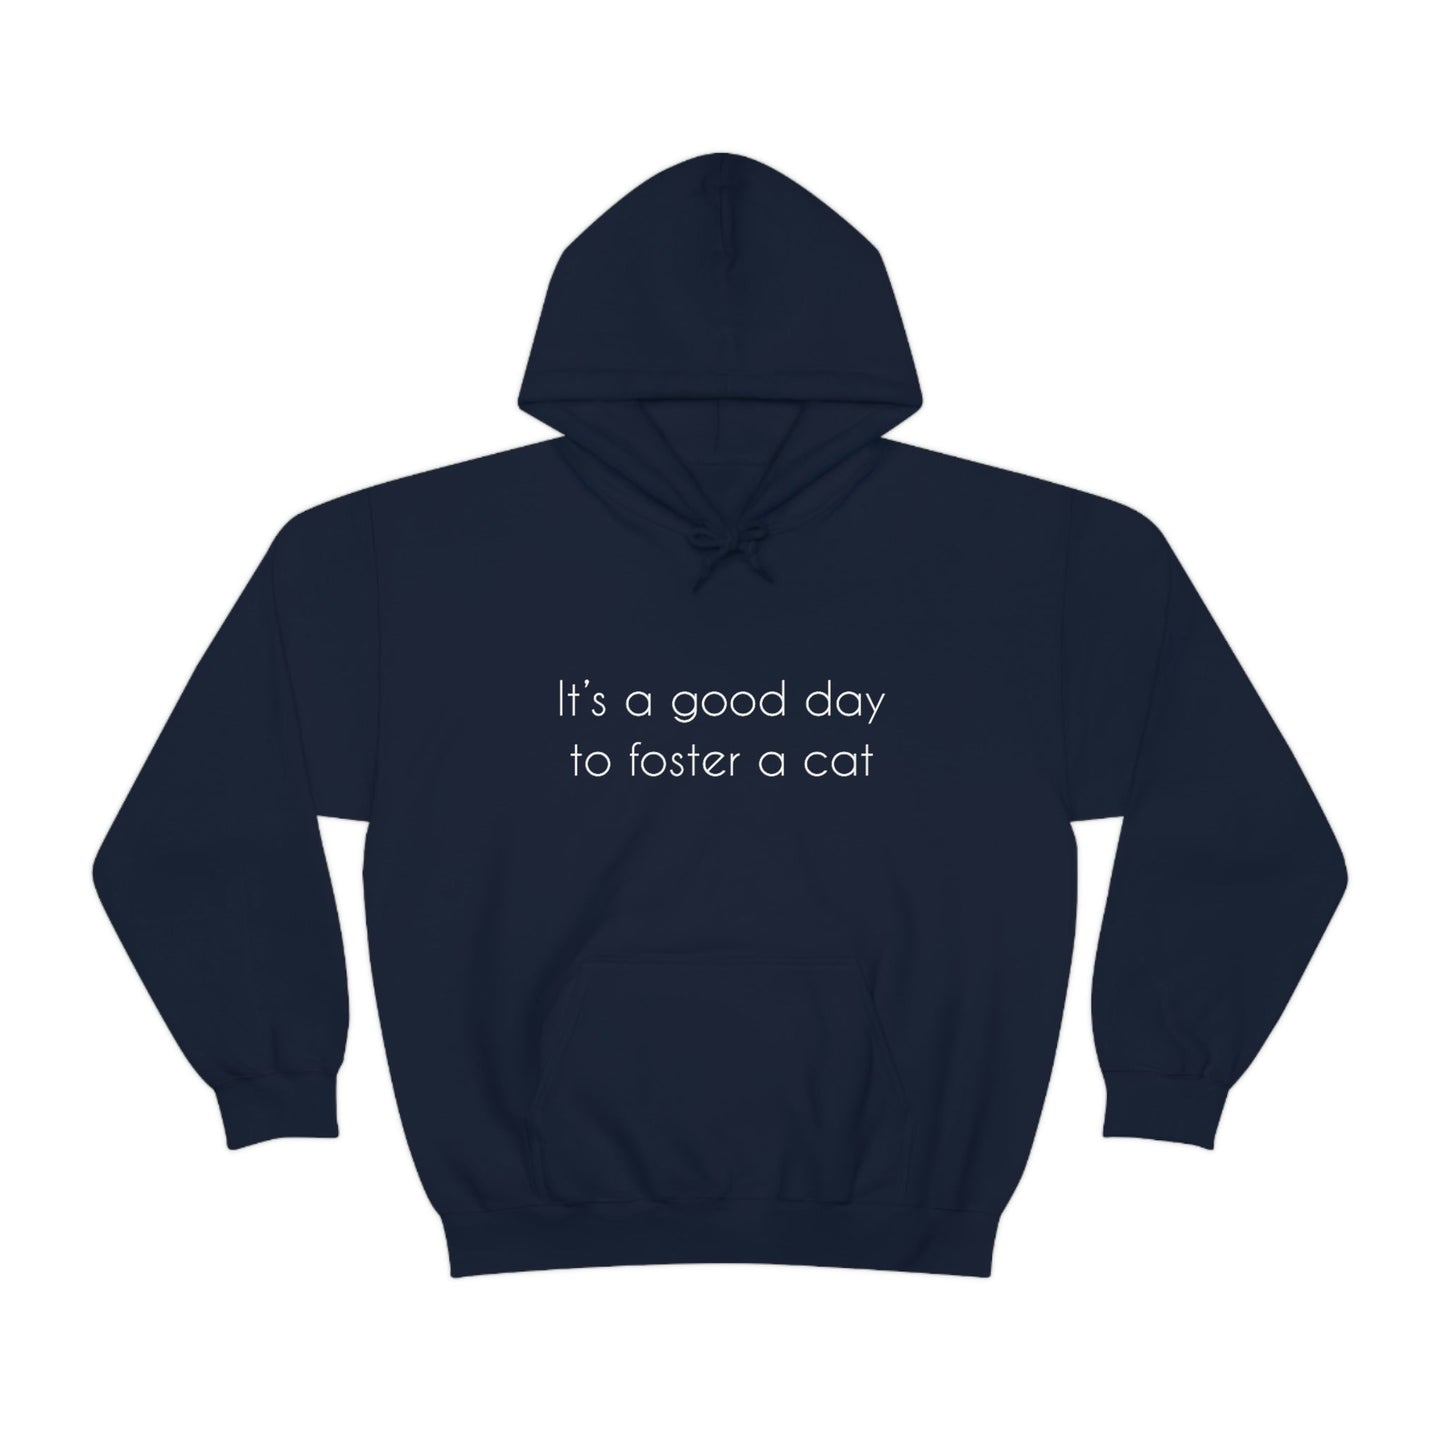 It's A Good Day To Foster A Cat | Hooded Sweatshirt - Detezi Designs-12368391450145313638